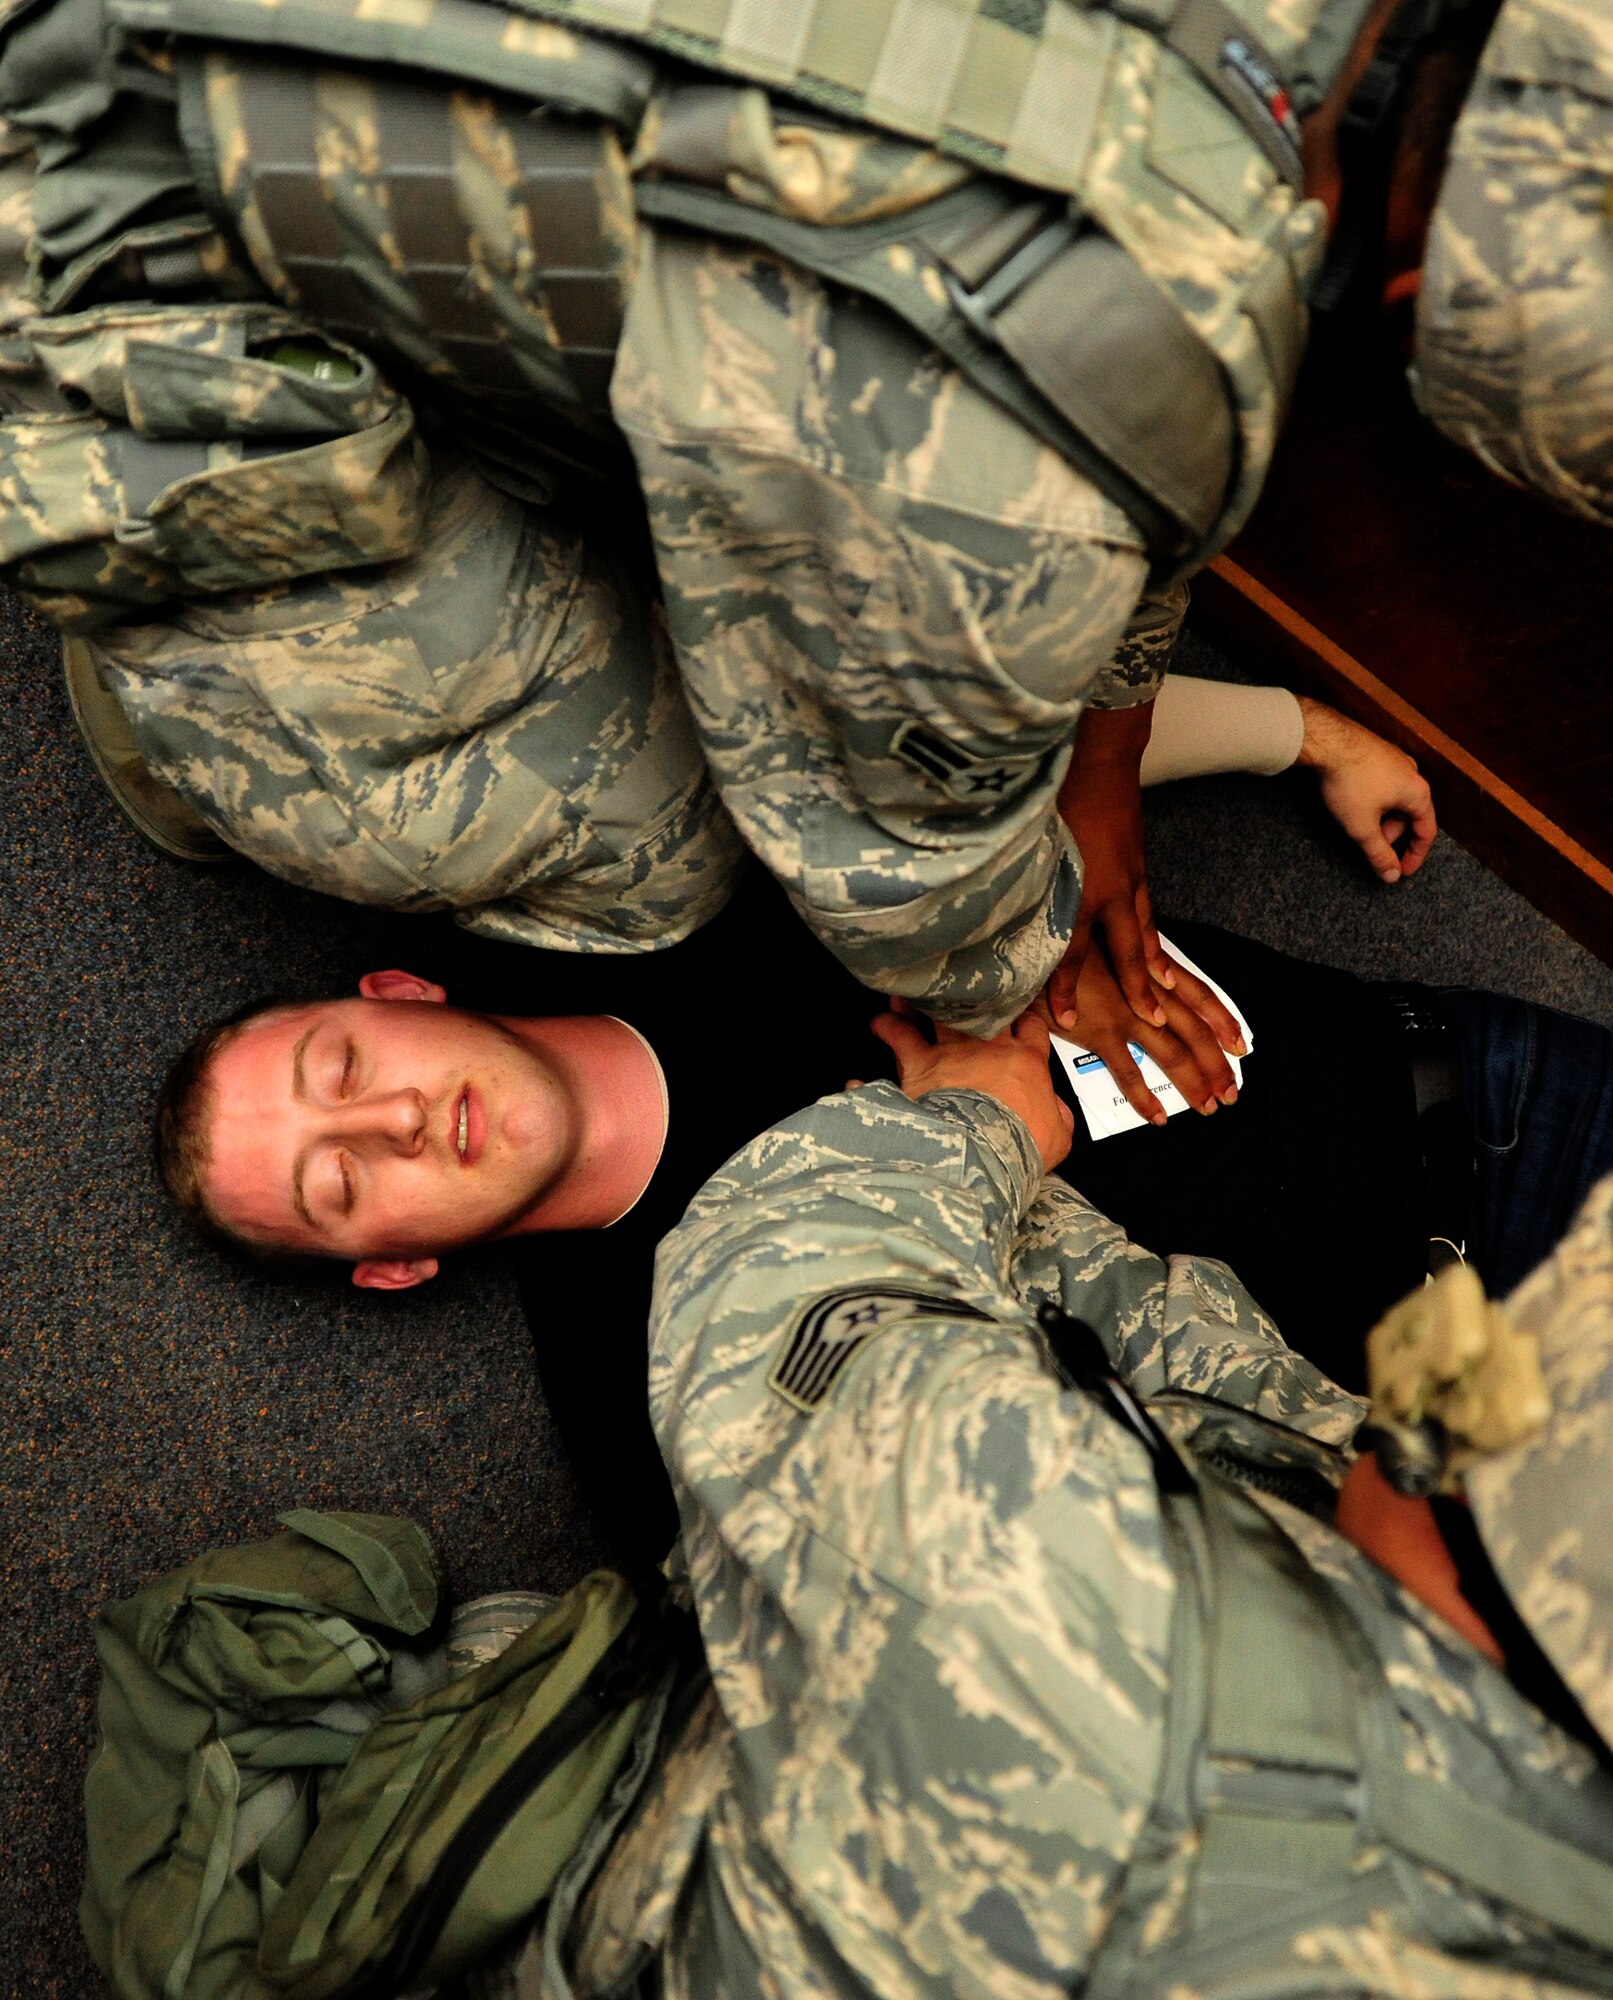 MISAWA AIR BASE, Japan – U.S. Air Force Airman 1st Class Diandre Zachary, top, and Tech. Sgt. Hiram Bundy, bottom, both 35th Security Forces Squadron perform self aid buddy care on role player Staff Sgt. Matthew Cella during an operational readiness exercise here Nov. 6. The 35th Fighter Wing is currently going through an ORE in preparation for an operational readiness inspection in December. (U.S. Air Force photo/Staff Sgt. Nathan Lipscomb)